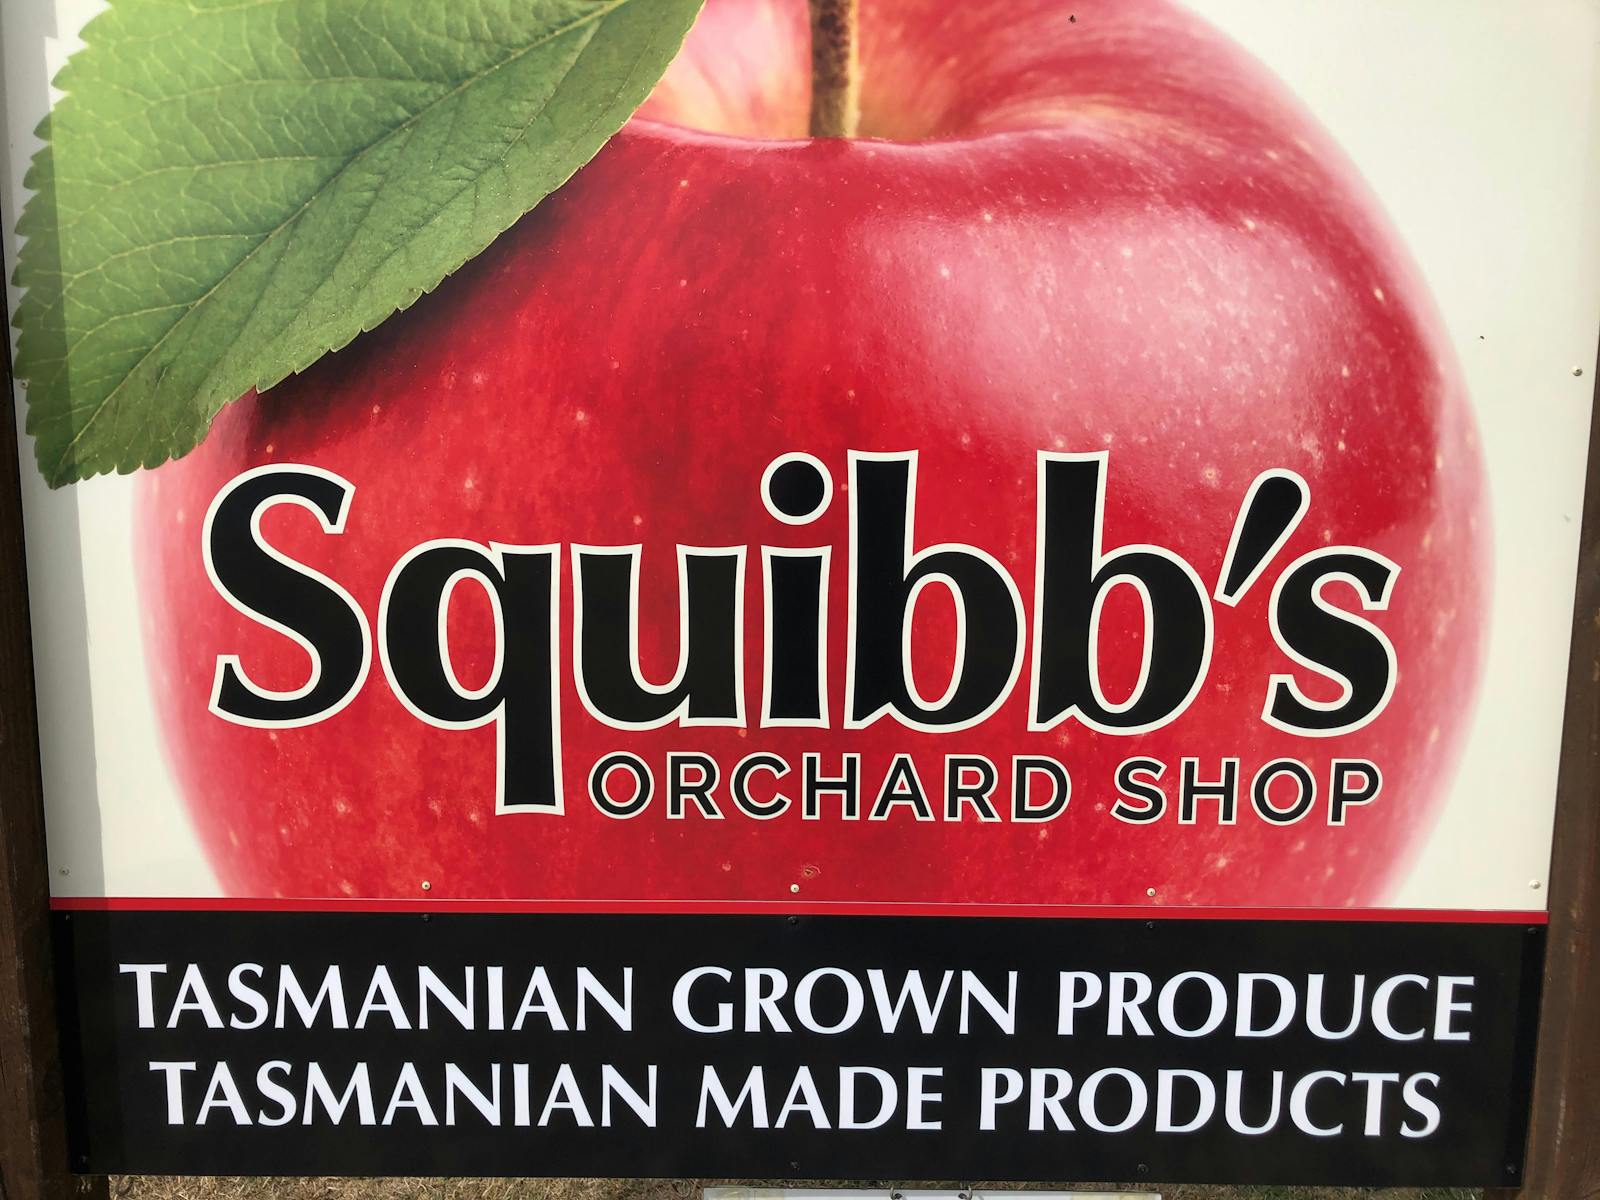 Squibb's Orchard Shop